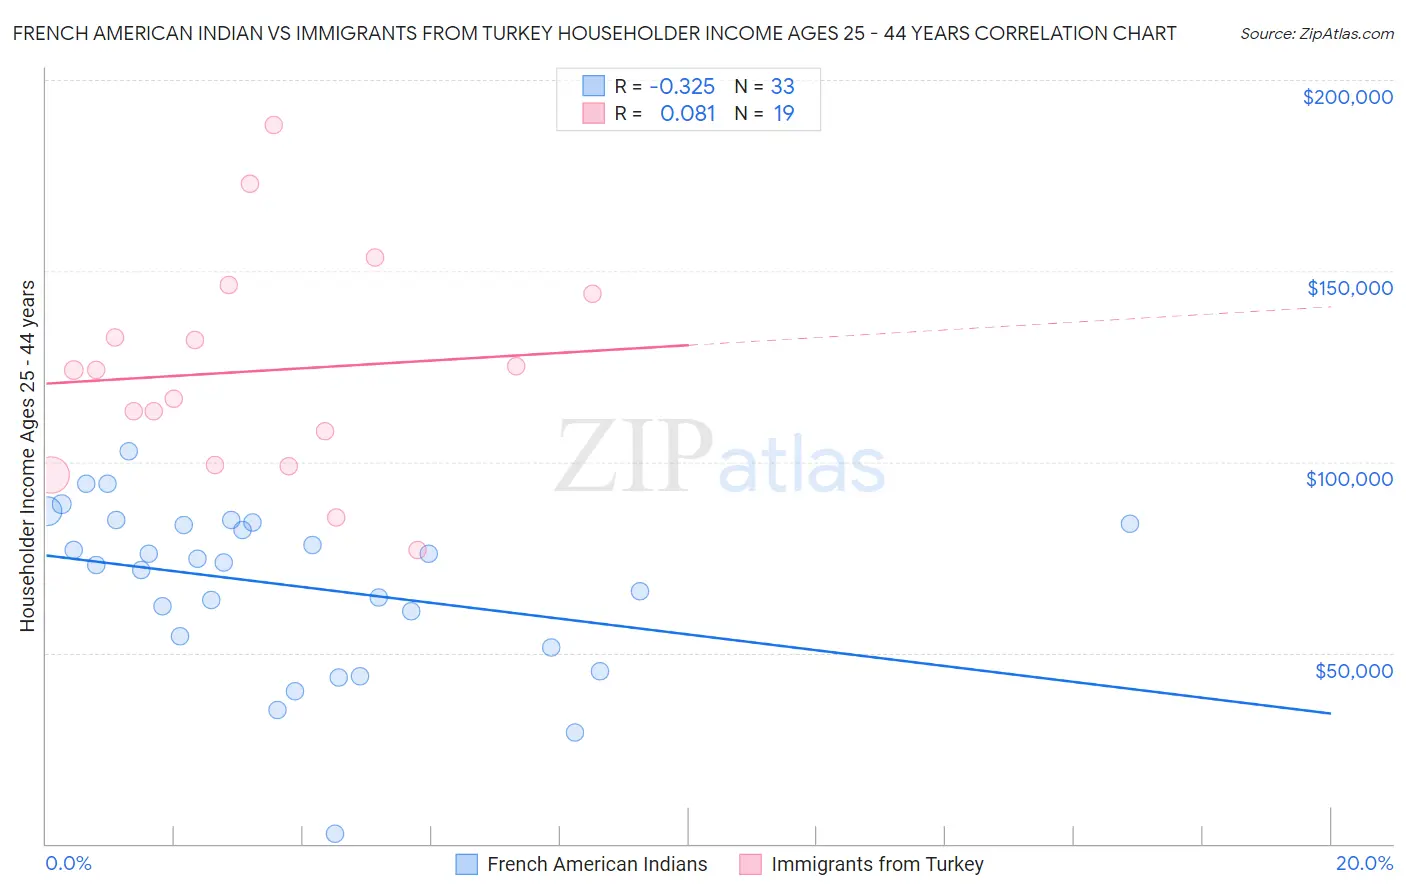 French American Indian vs Immigrants from Turkey Householder Income Ages 25 - 44 years